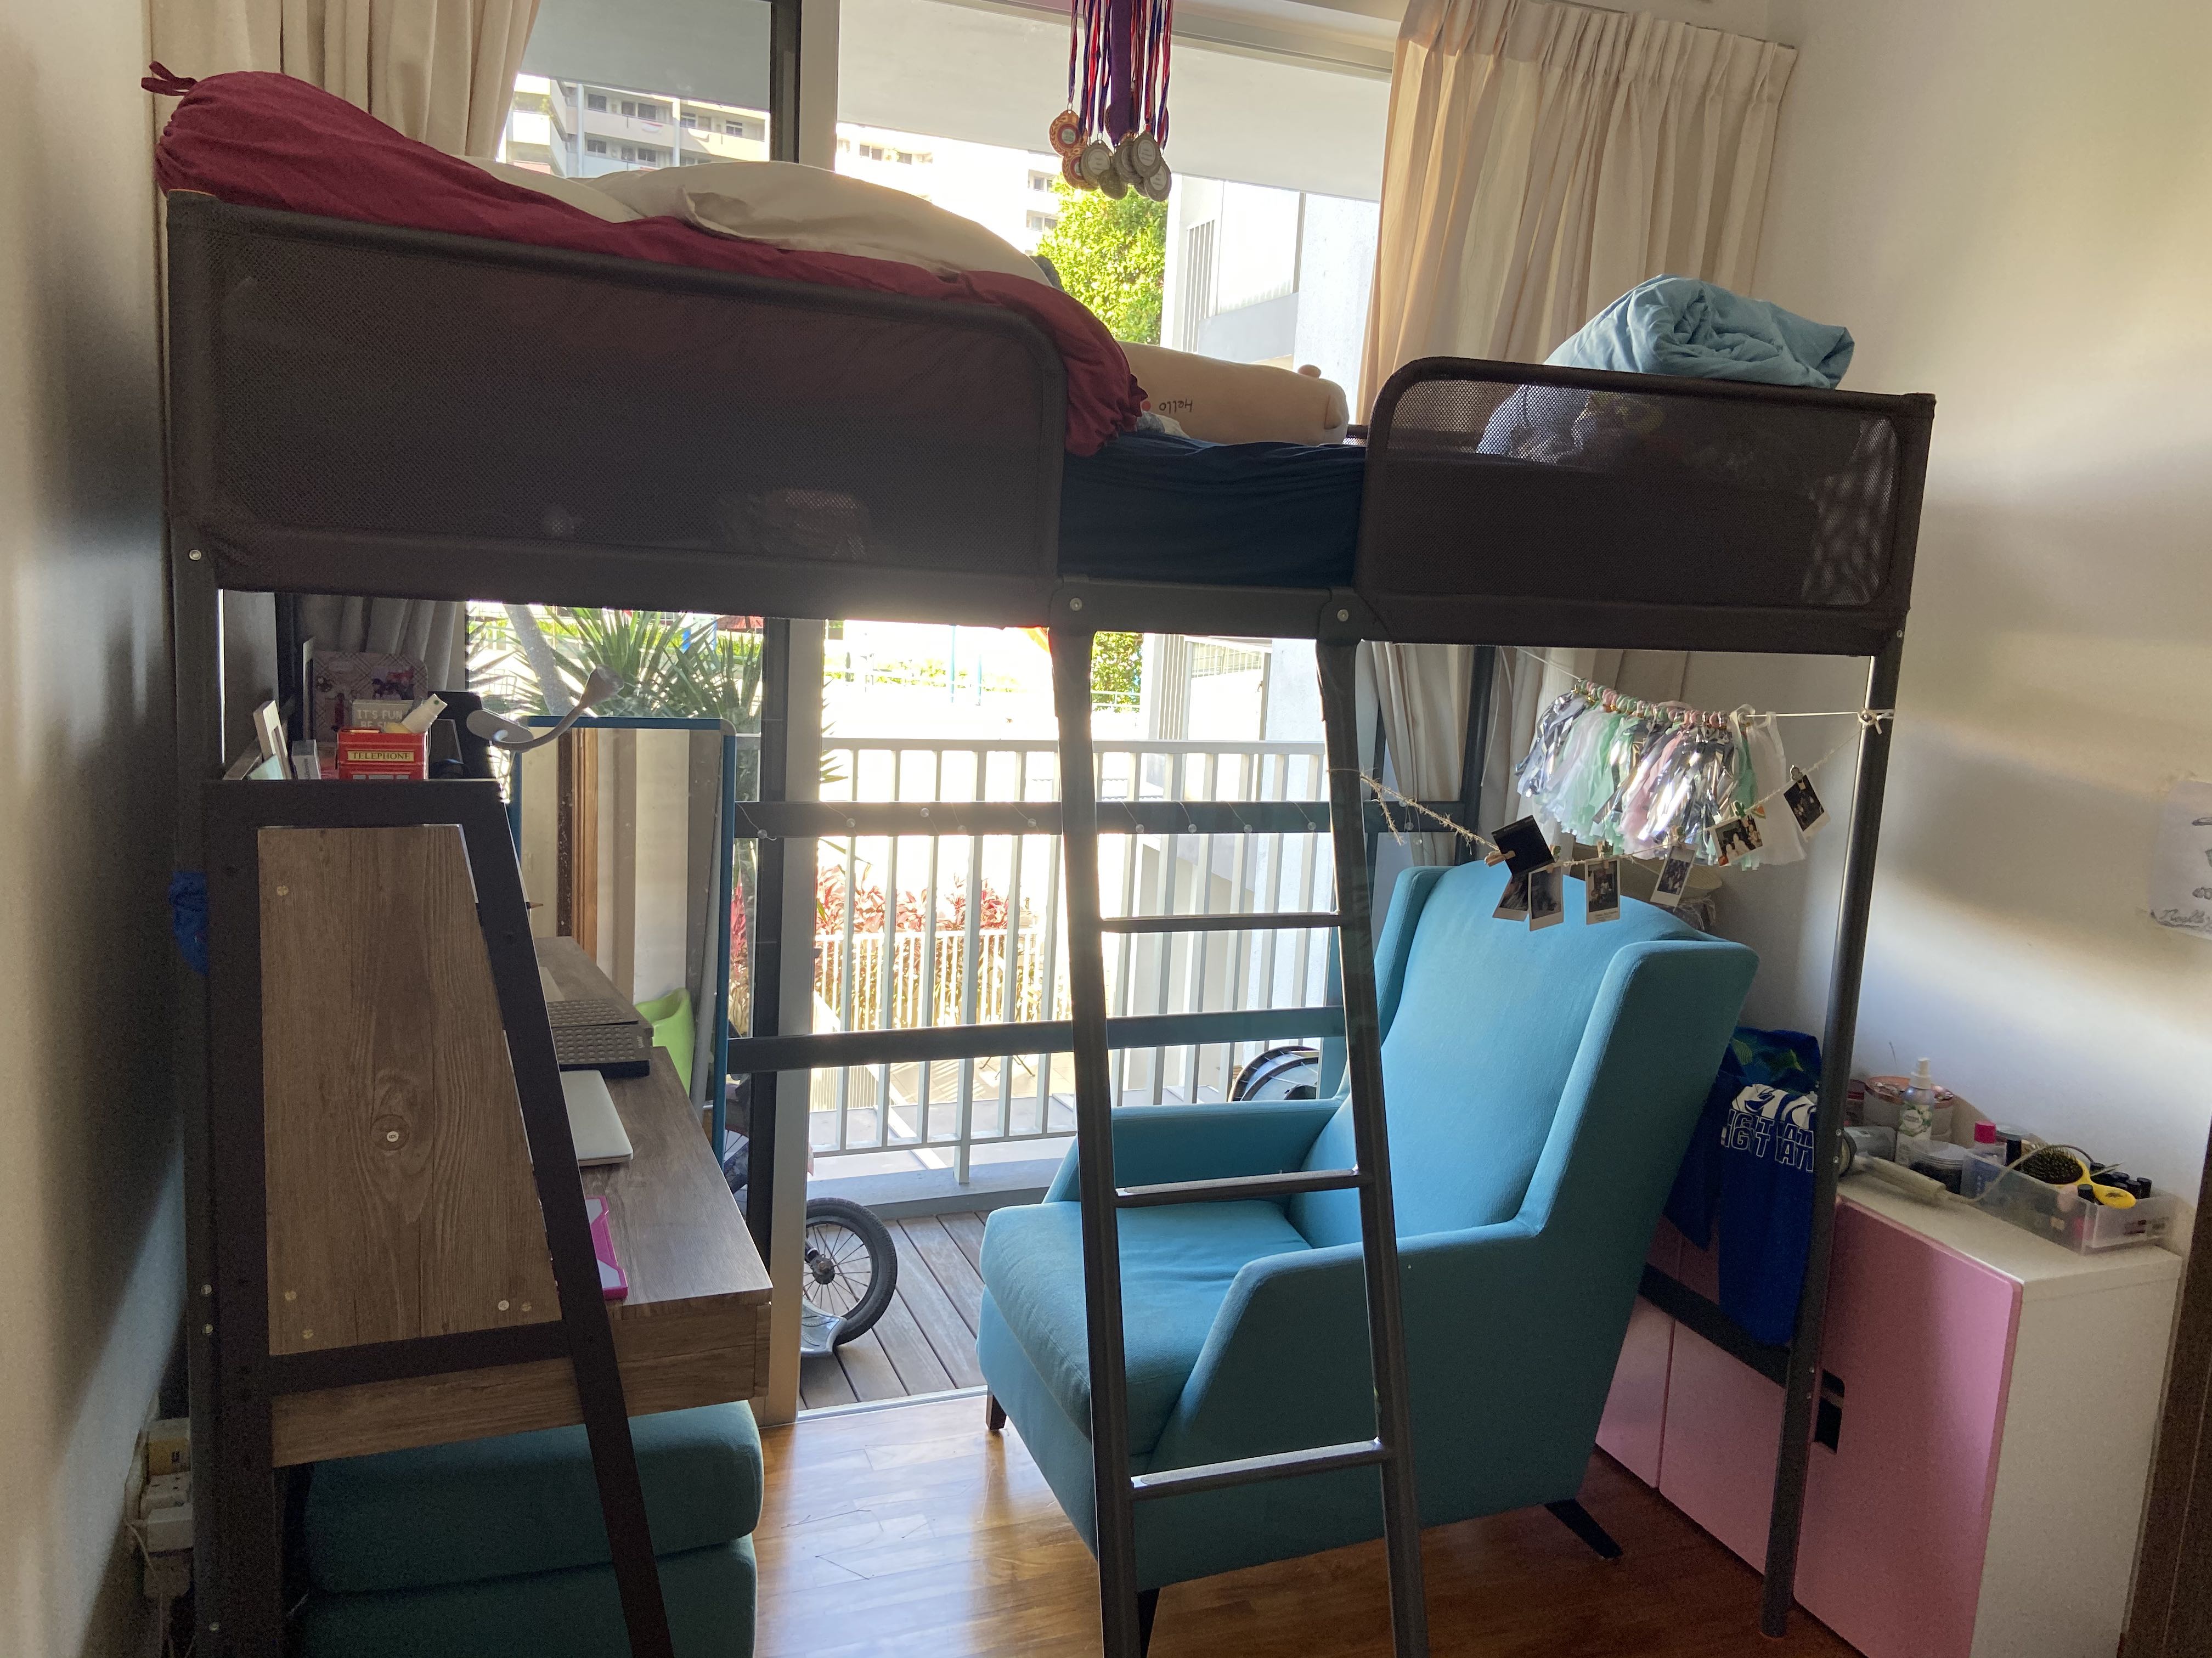 1 Tuffing Ikea Loft Beds With, Ikea Tuffing Bunk Bed Review